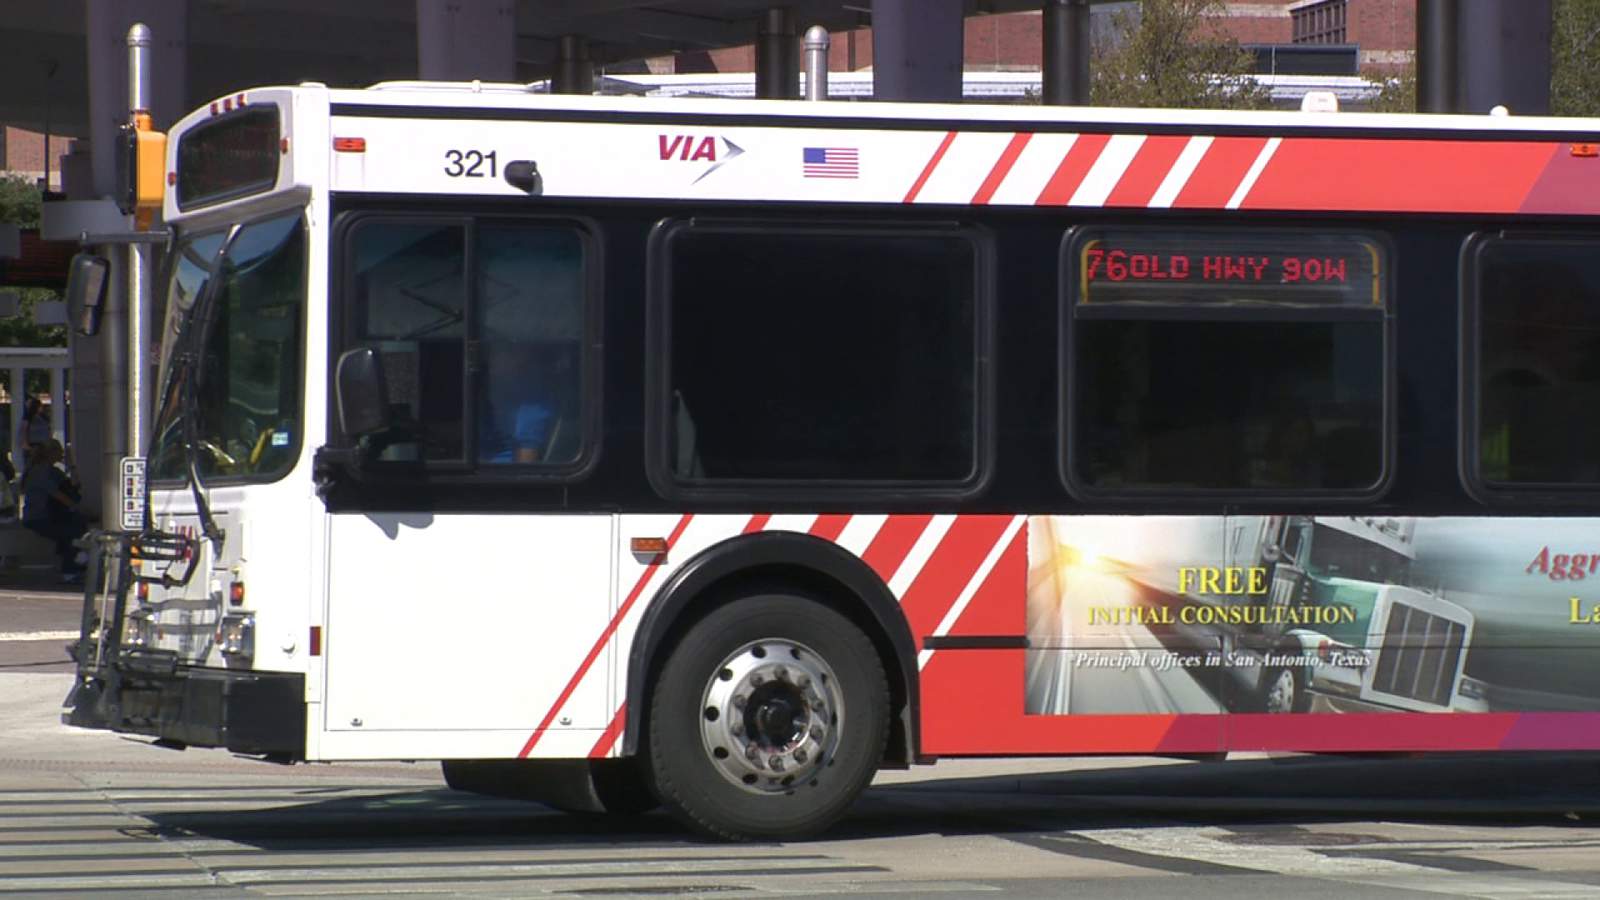 VIA Metropolitan Transit employee tests positive for COVID-19, company official says